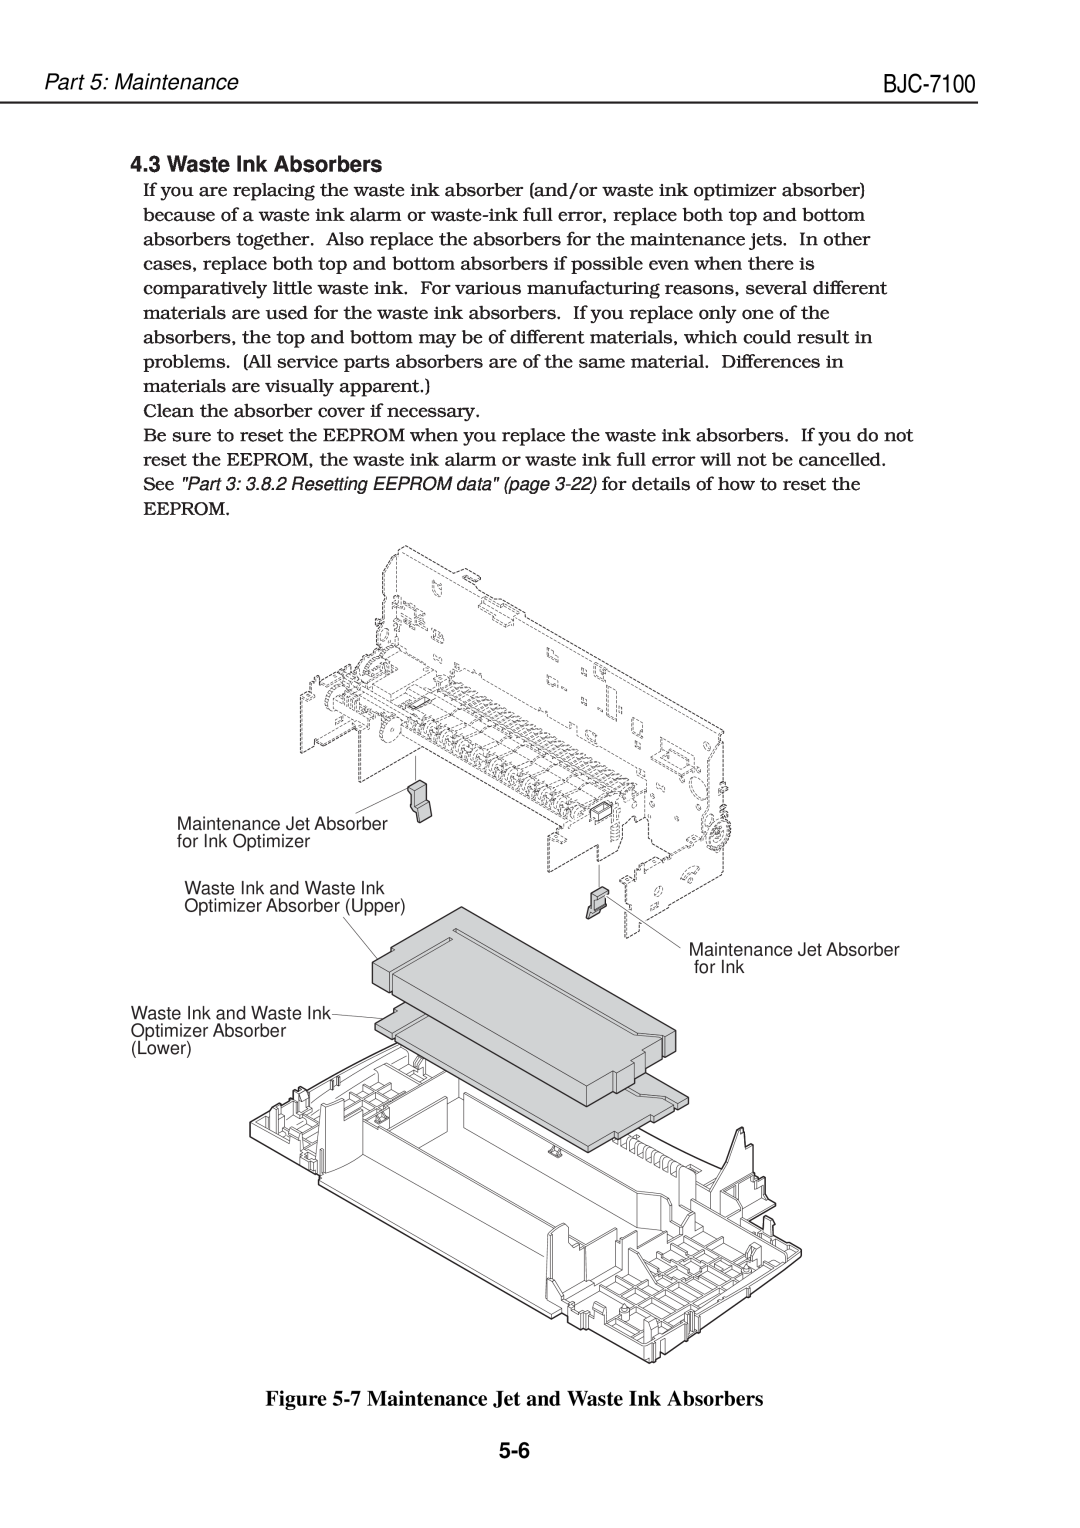 Canon QY8-1360-000 manual 7 Maintenance Jet and Waste Ink Absorbers, Part 5 Maintenance, BJC-7100 